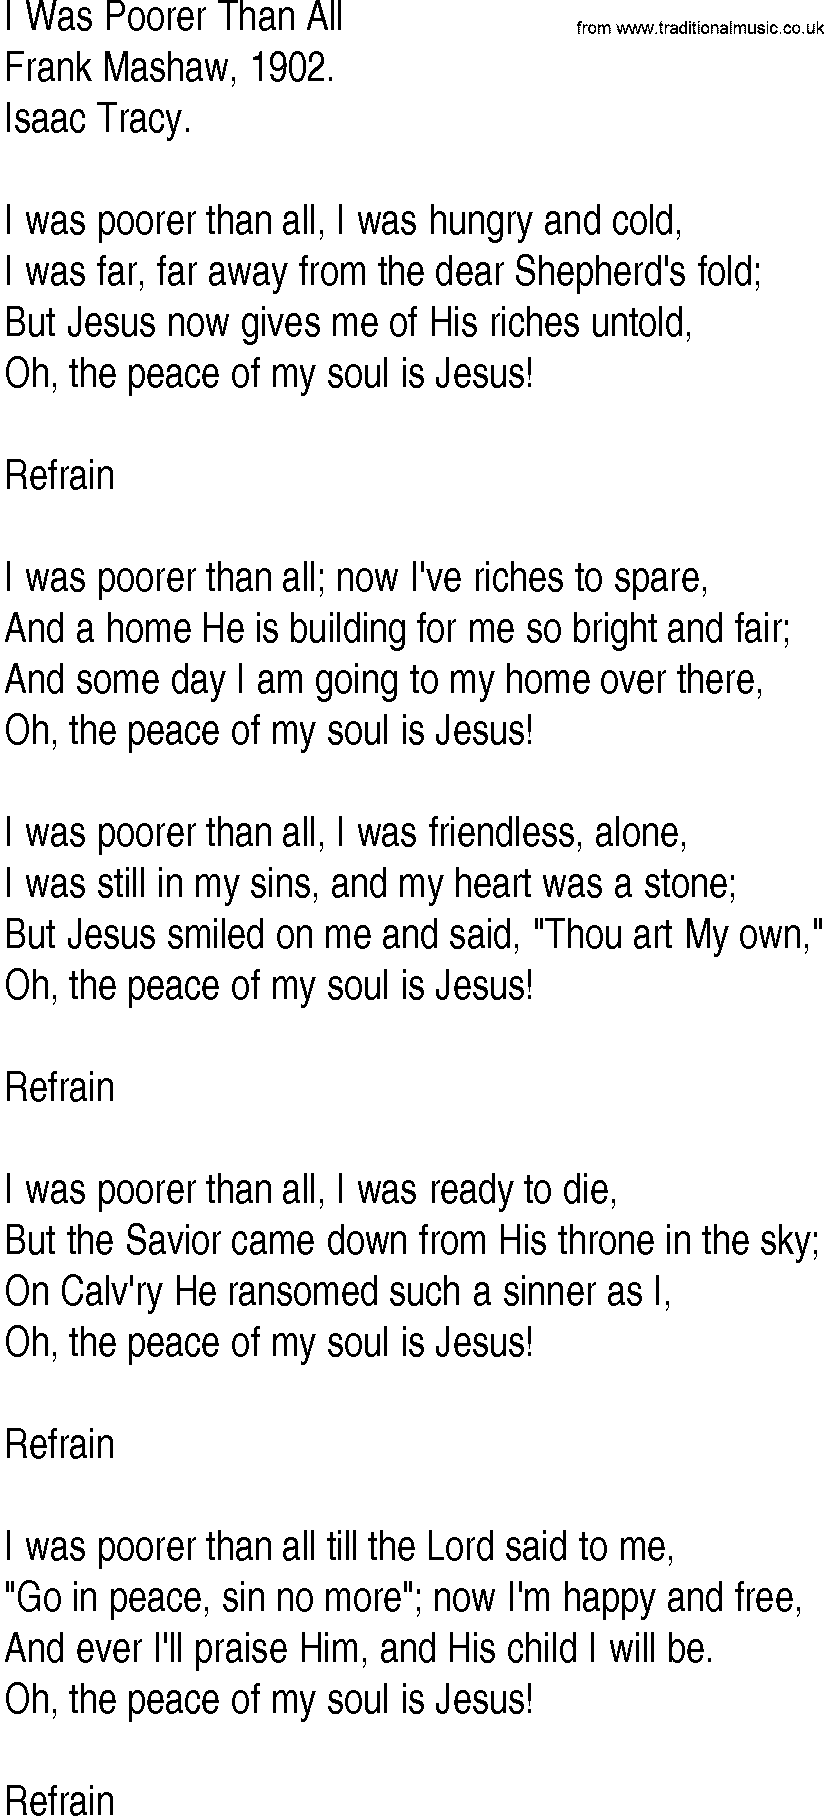 Hymn and Gospel Song: I Was Poorer Than All by Frank Mashaw lyrics